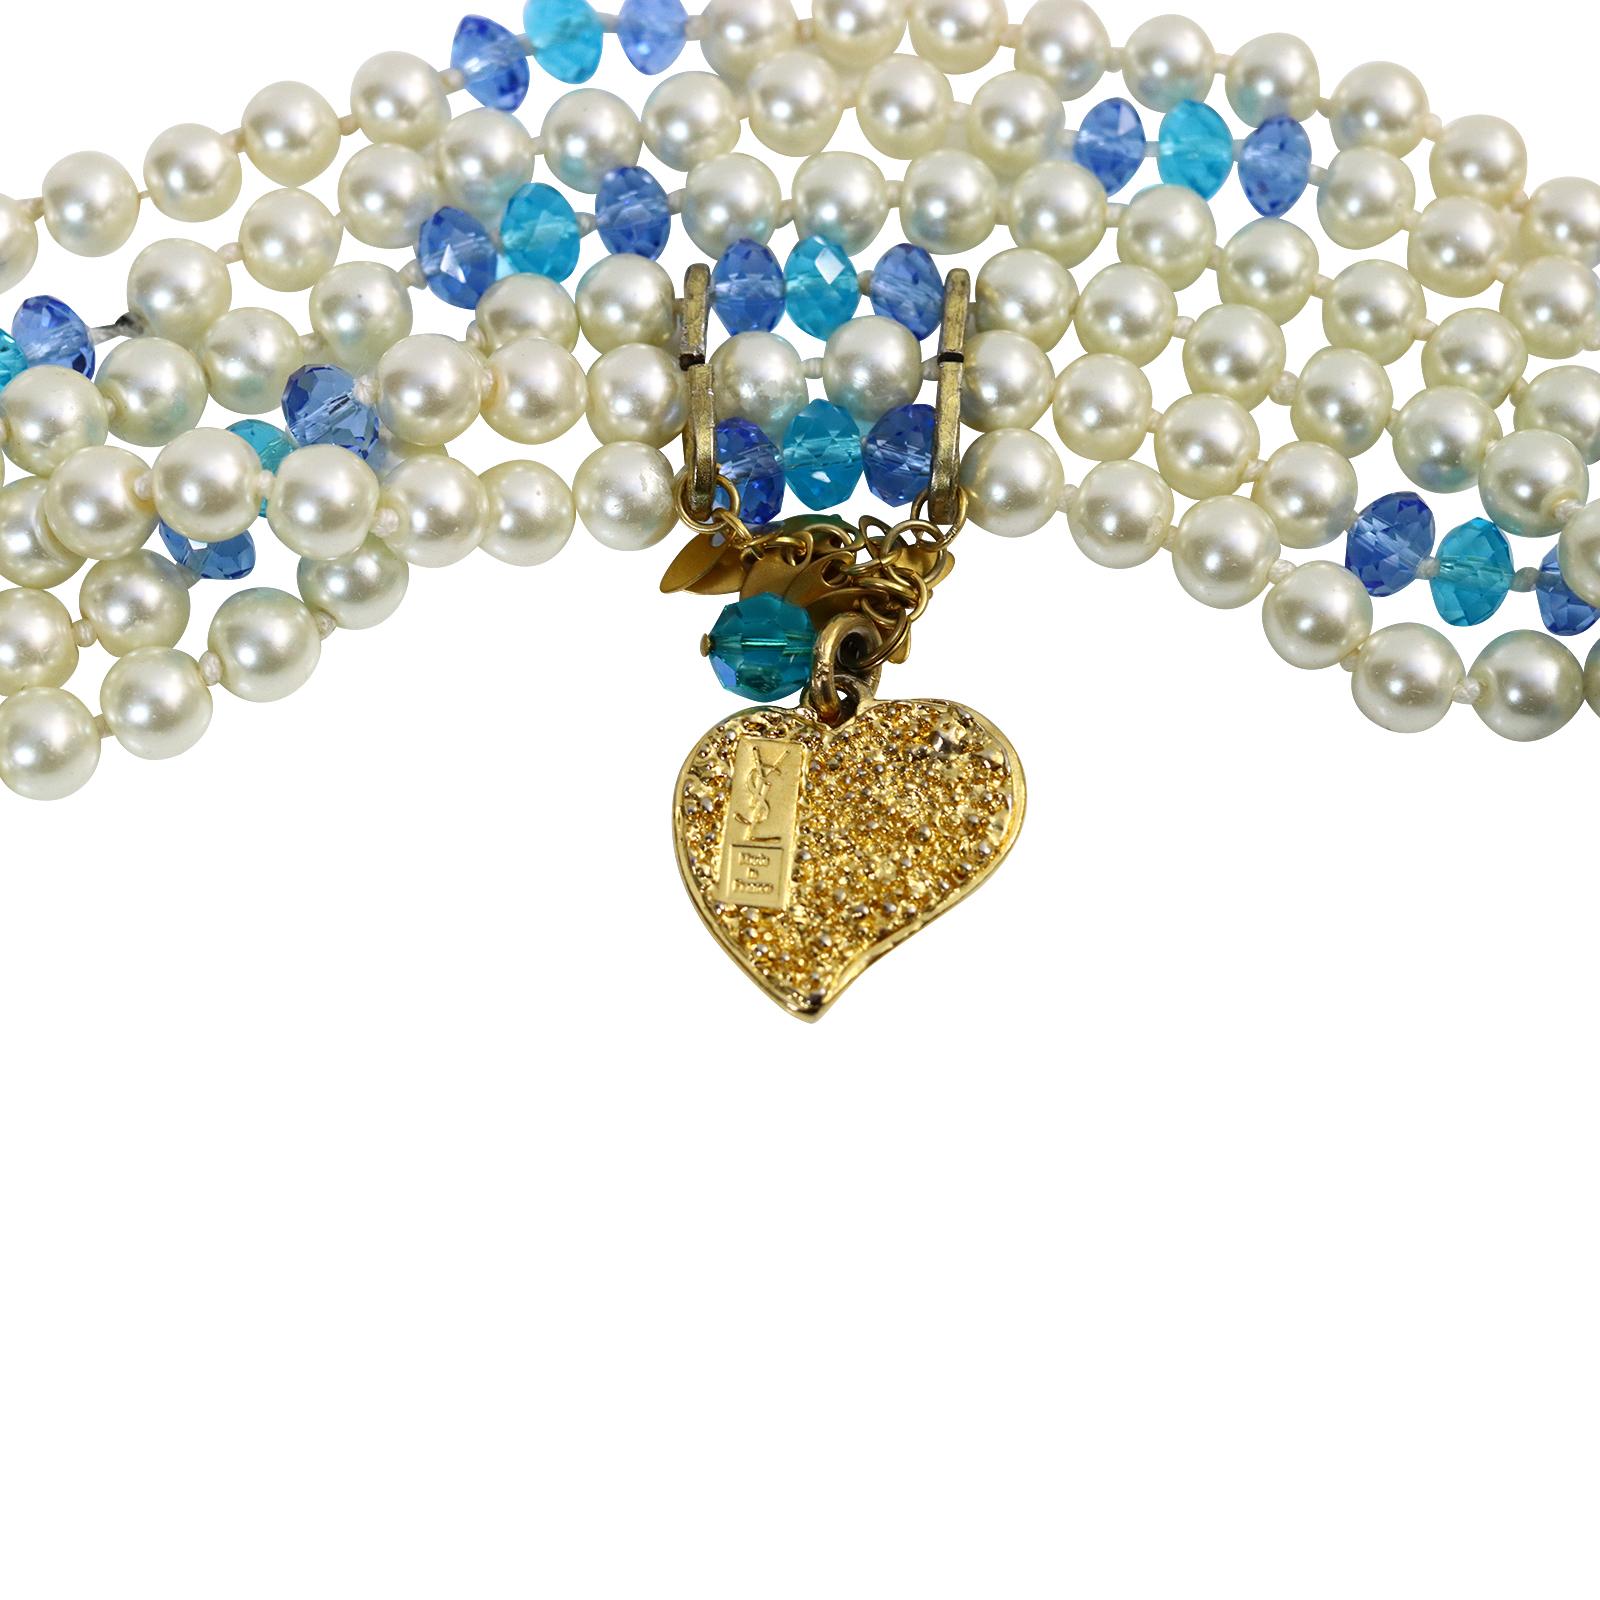 Vintage Yves Saint Laurent YSL 3 Strand Pearl and Blue Bead Necklace Circa 1990s For Sale 5